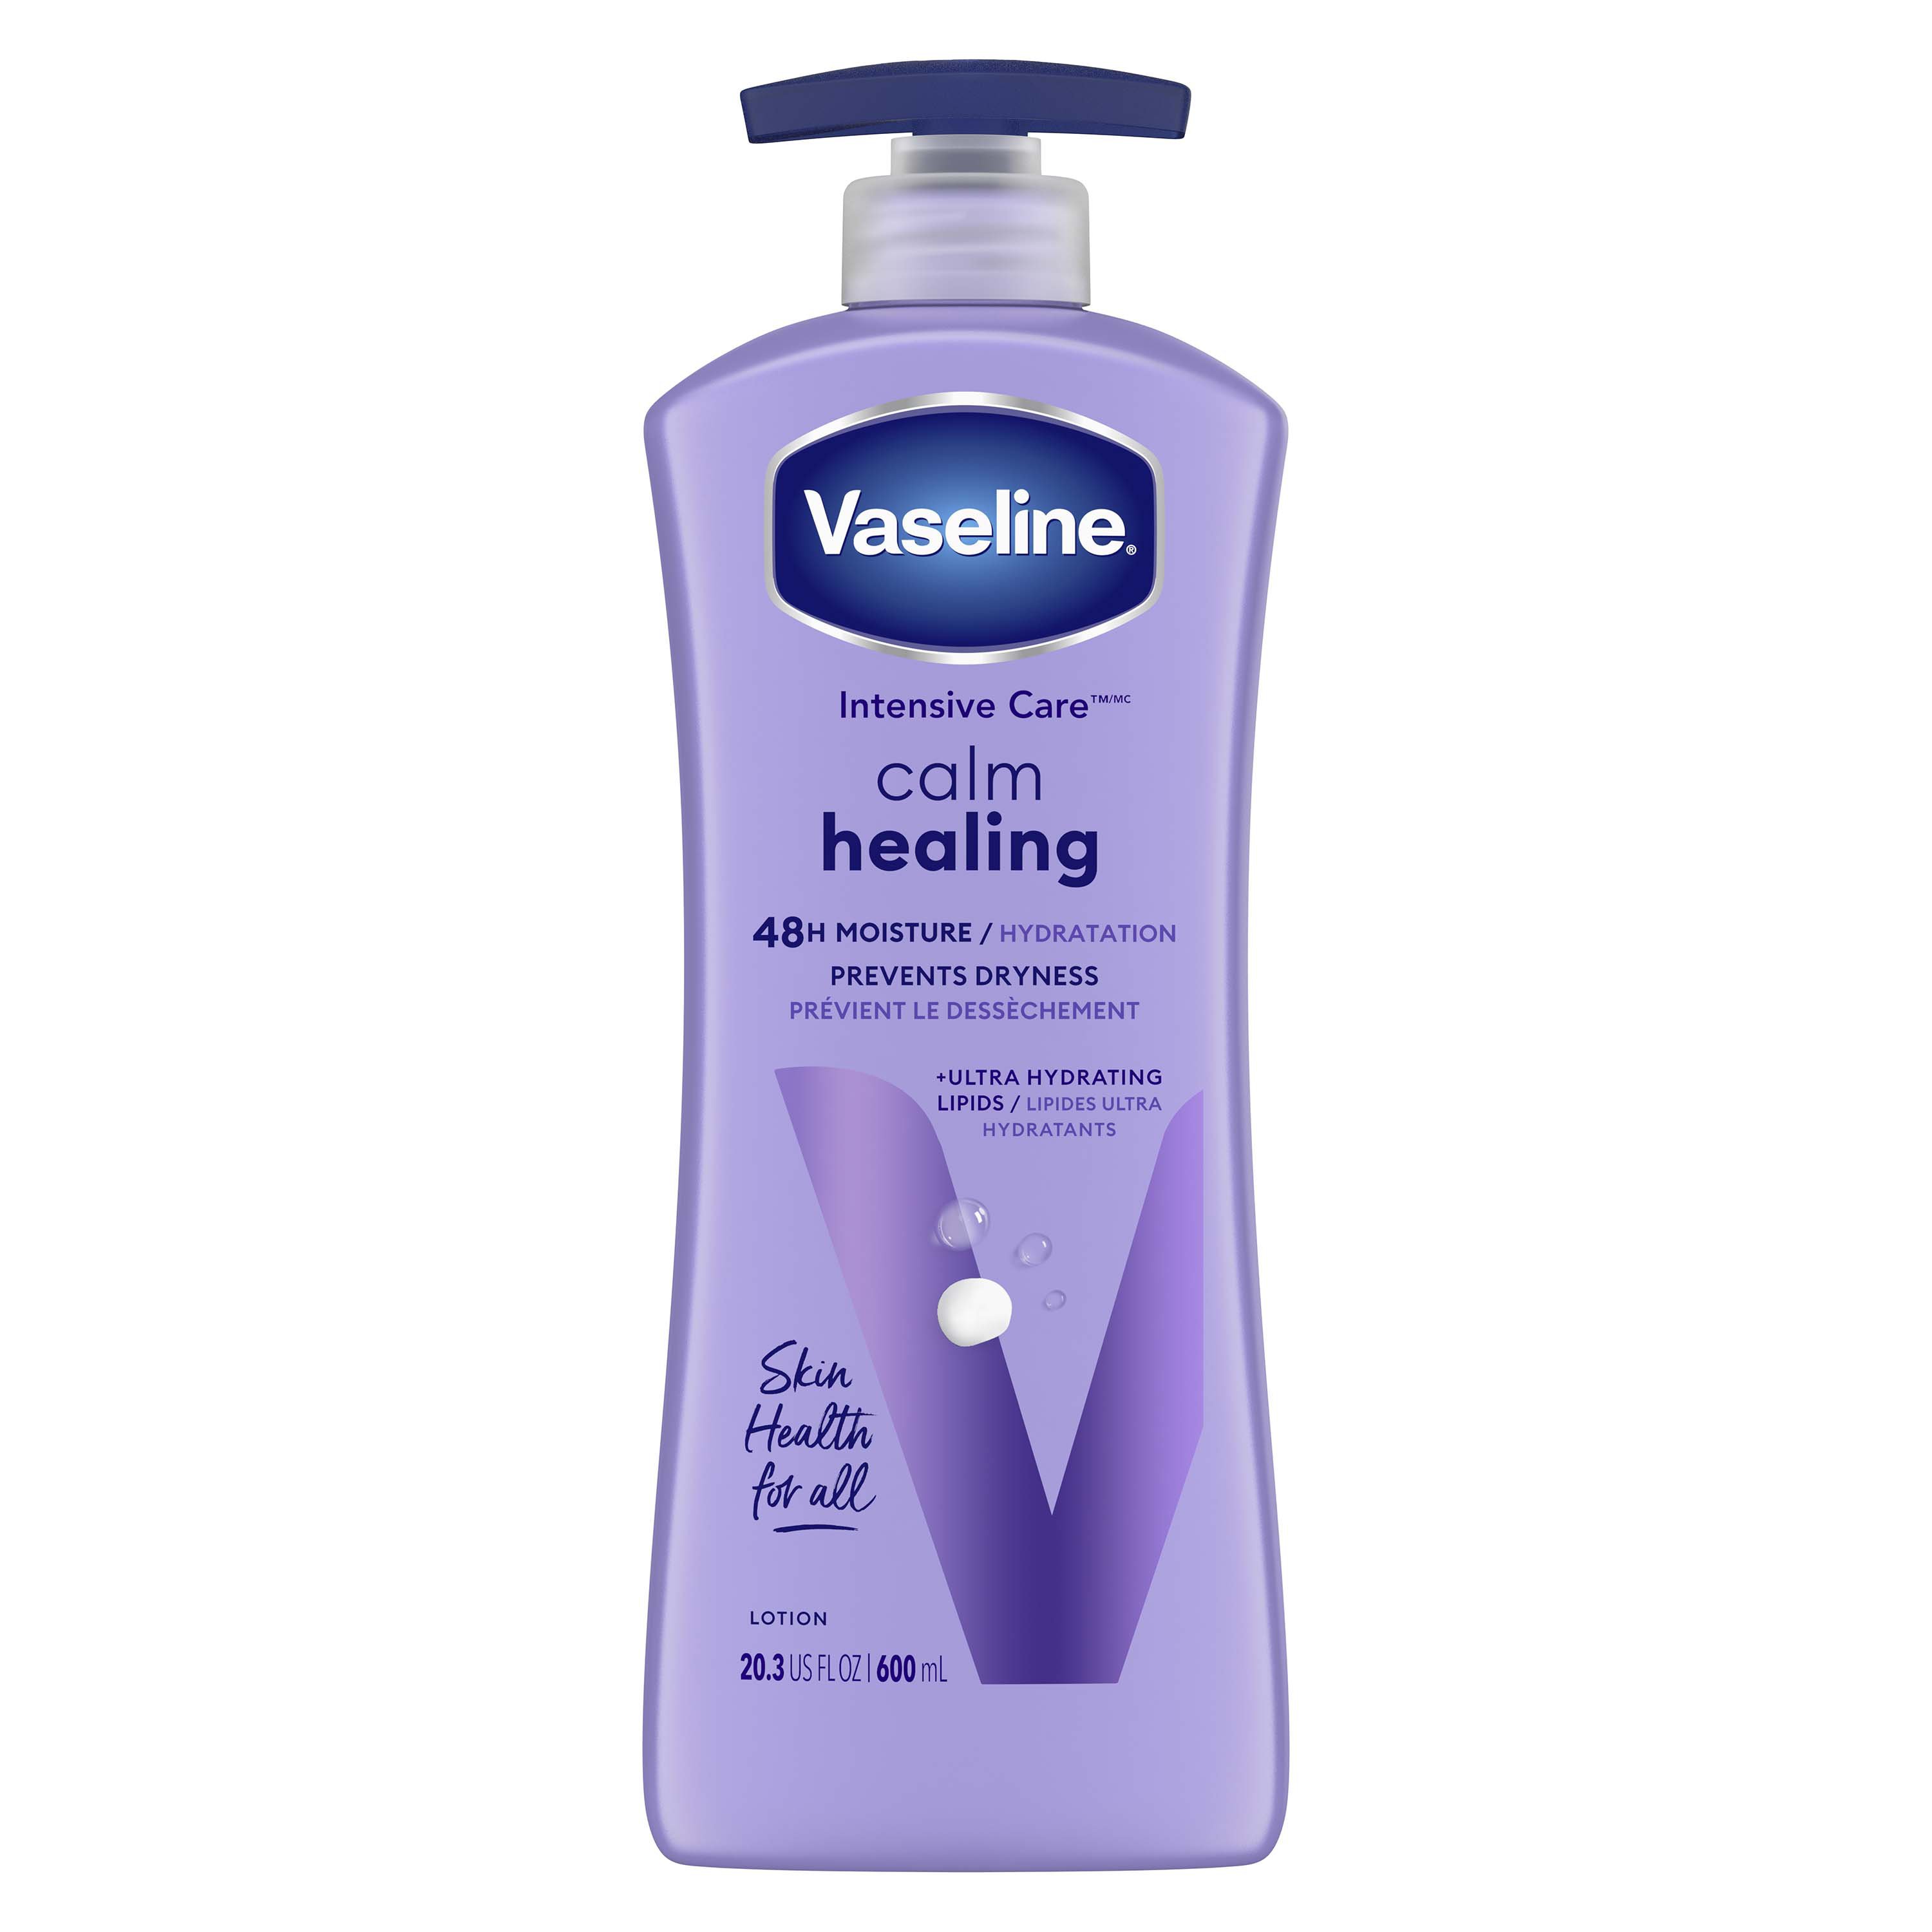 Vaseline Intensive Care Healing Body Lotion Shop Body at H-E-B